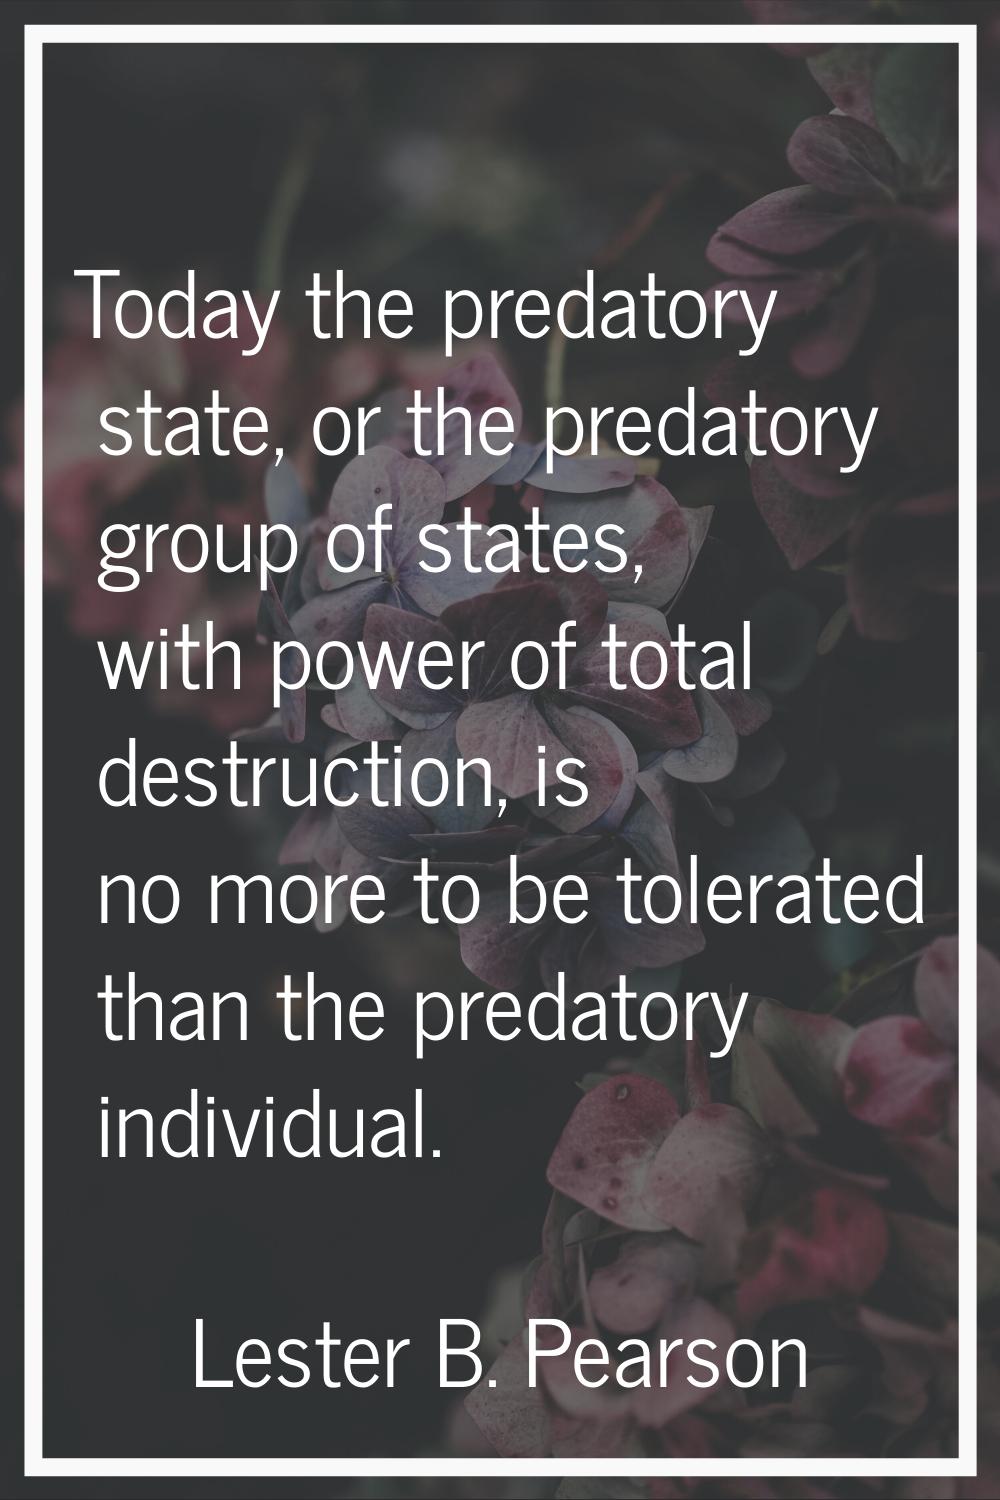 Today the predatory state, or the predatory group of states, with power of total destruction, is no